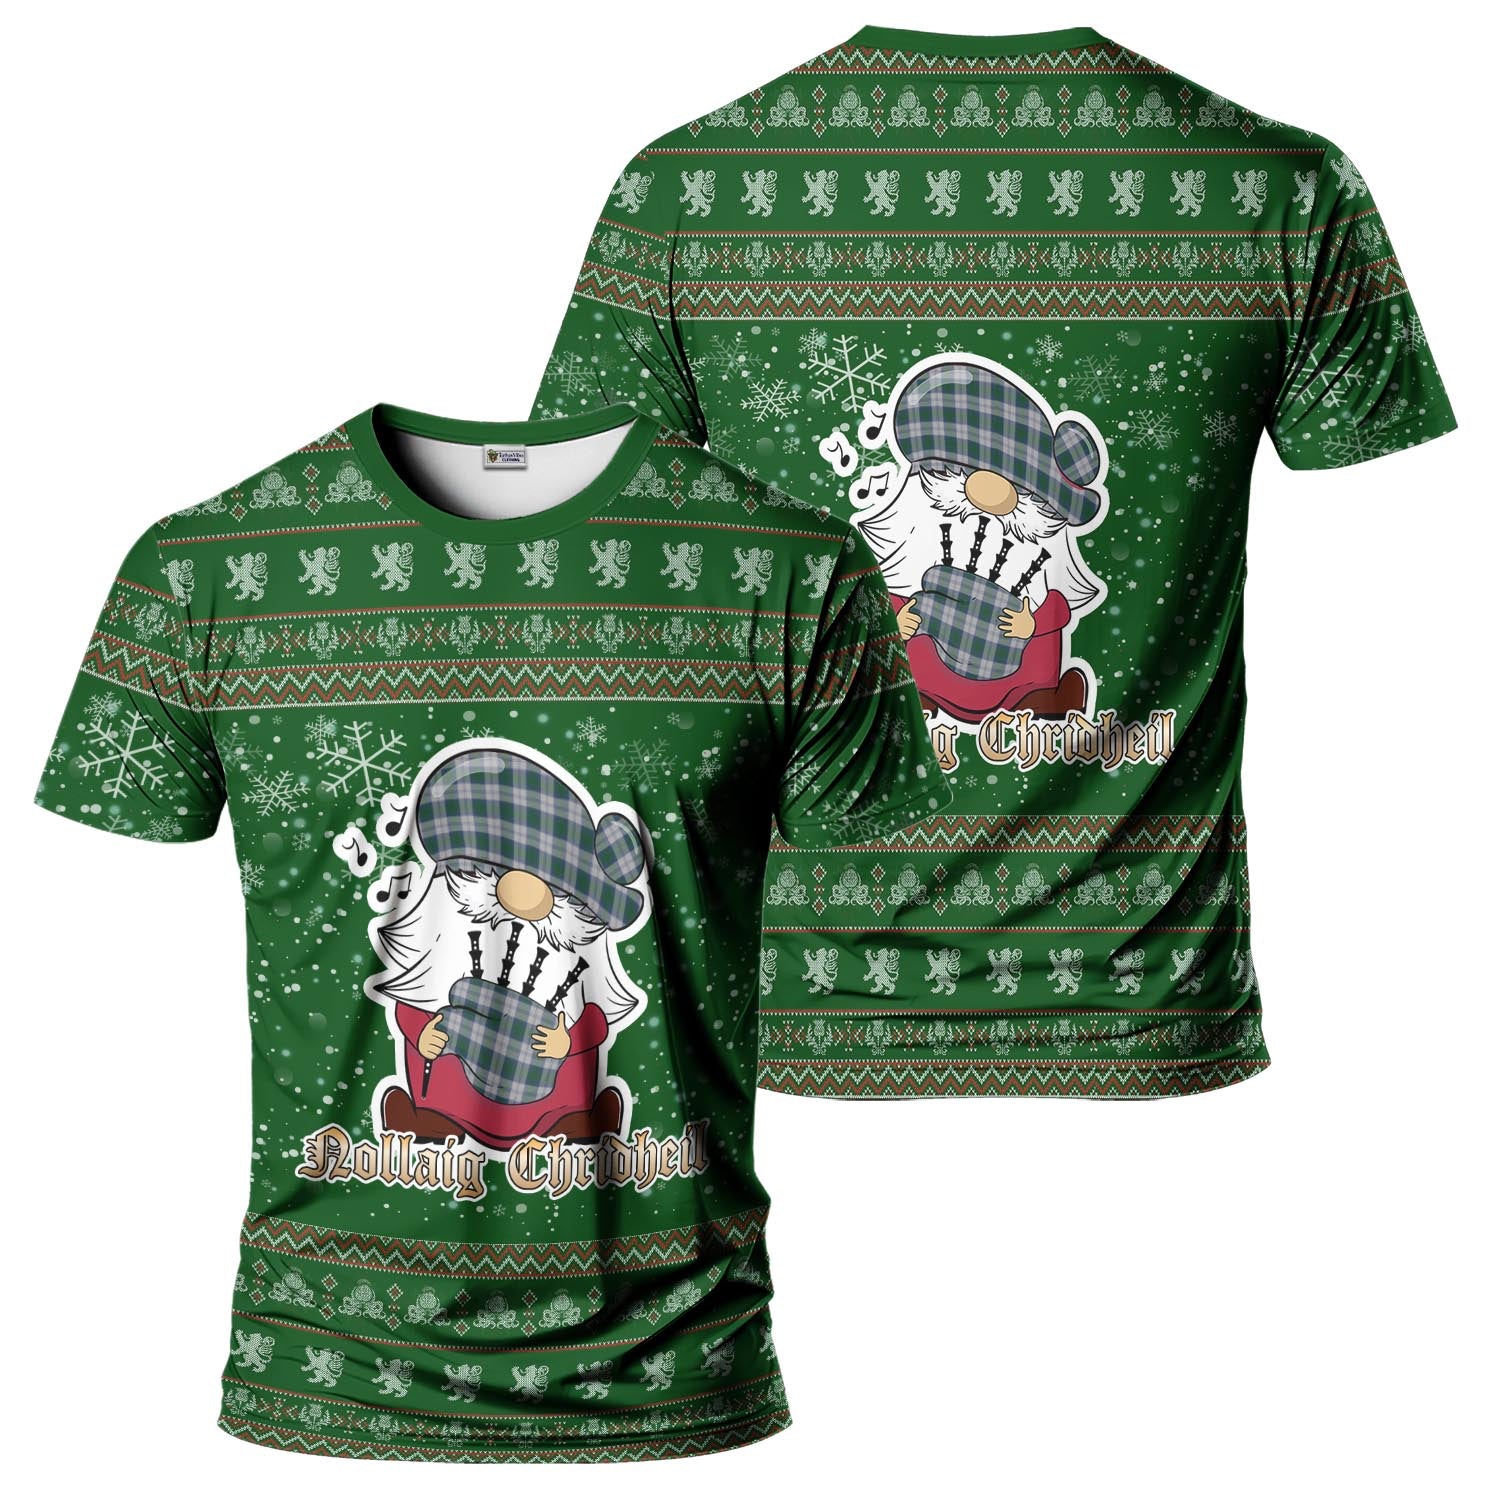 Lindsay Dress Clan Christmas Family T-Shirt with Funny Gnome Playing Bagpipes Men's Shirt Green - Tartanvibesclothing